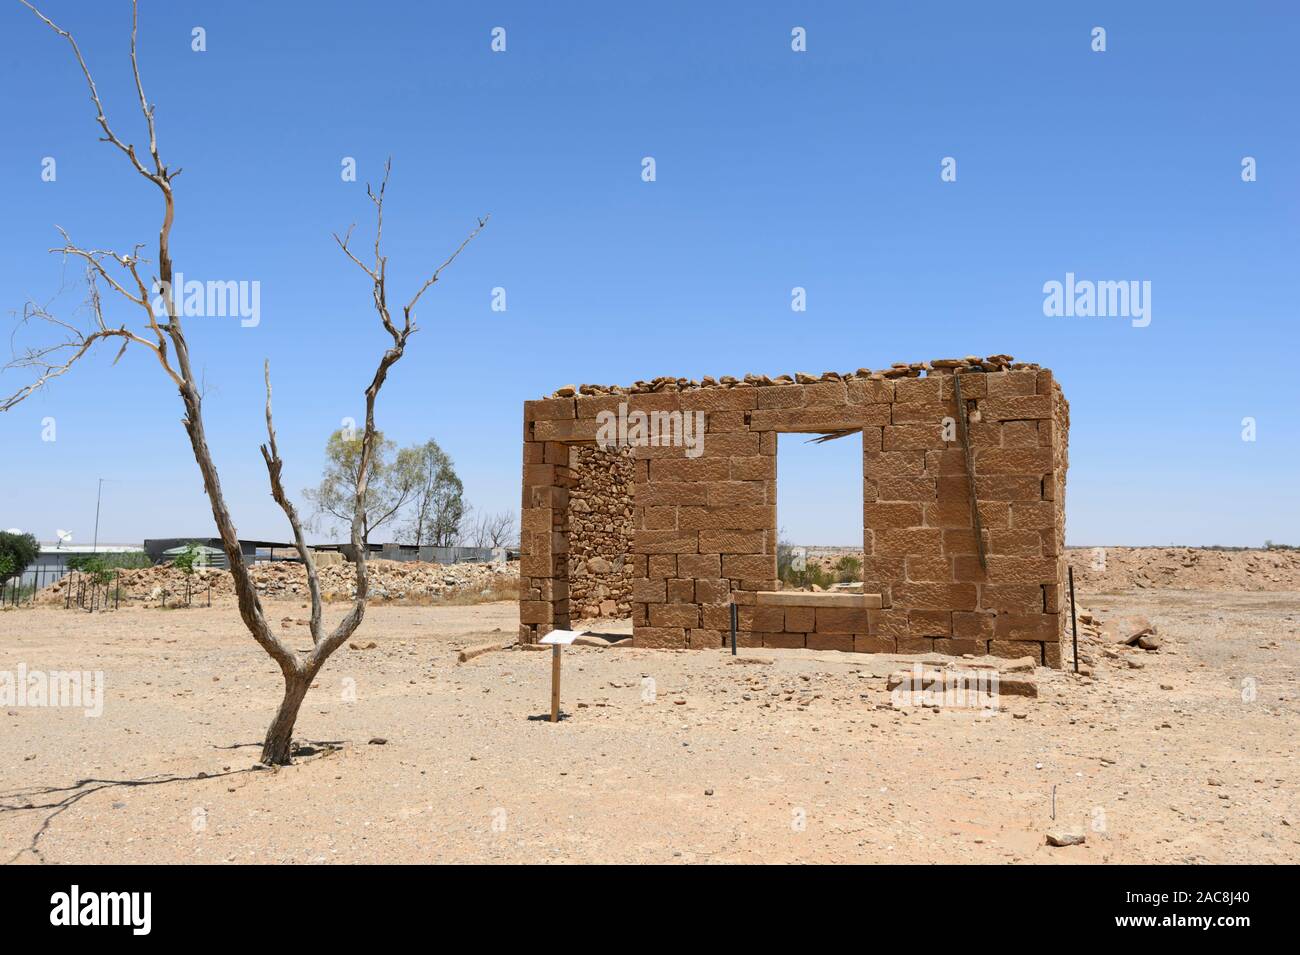 Historic ruins of the Commercial Bank building, 1881, in the remote Outback town of Milparinka, New South Wales, NSW, Australia Stock Photo